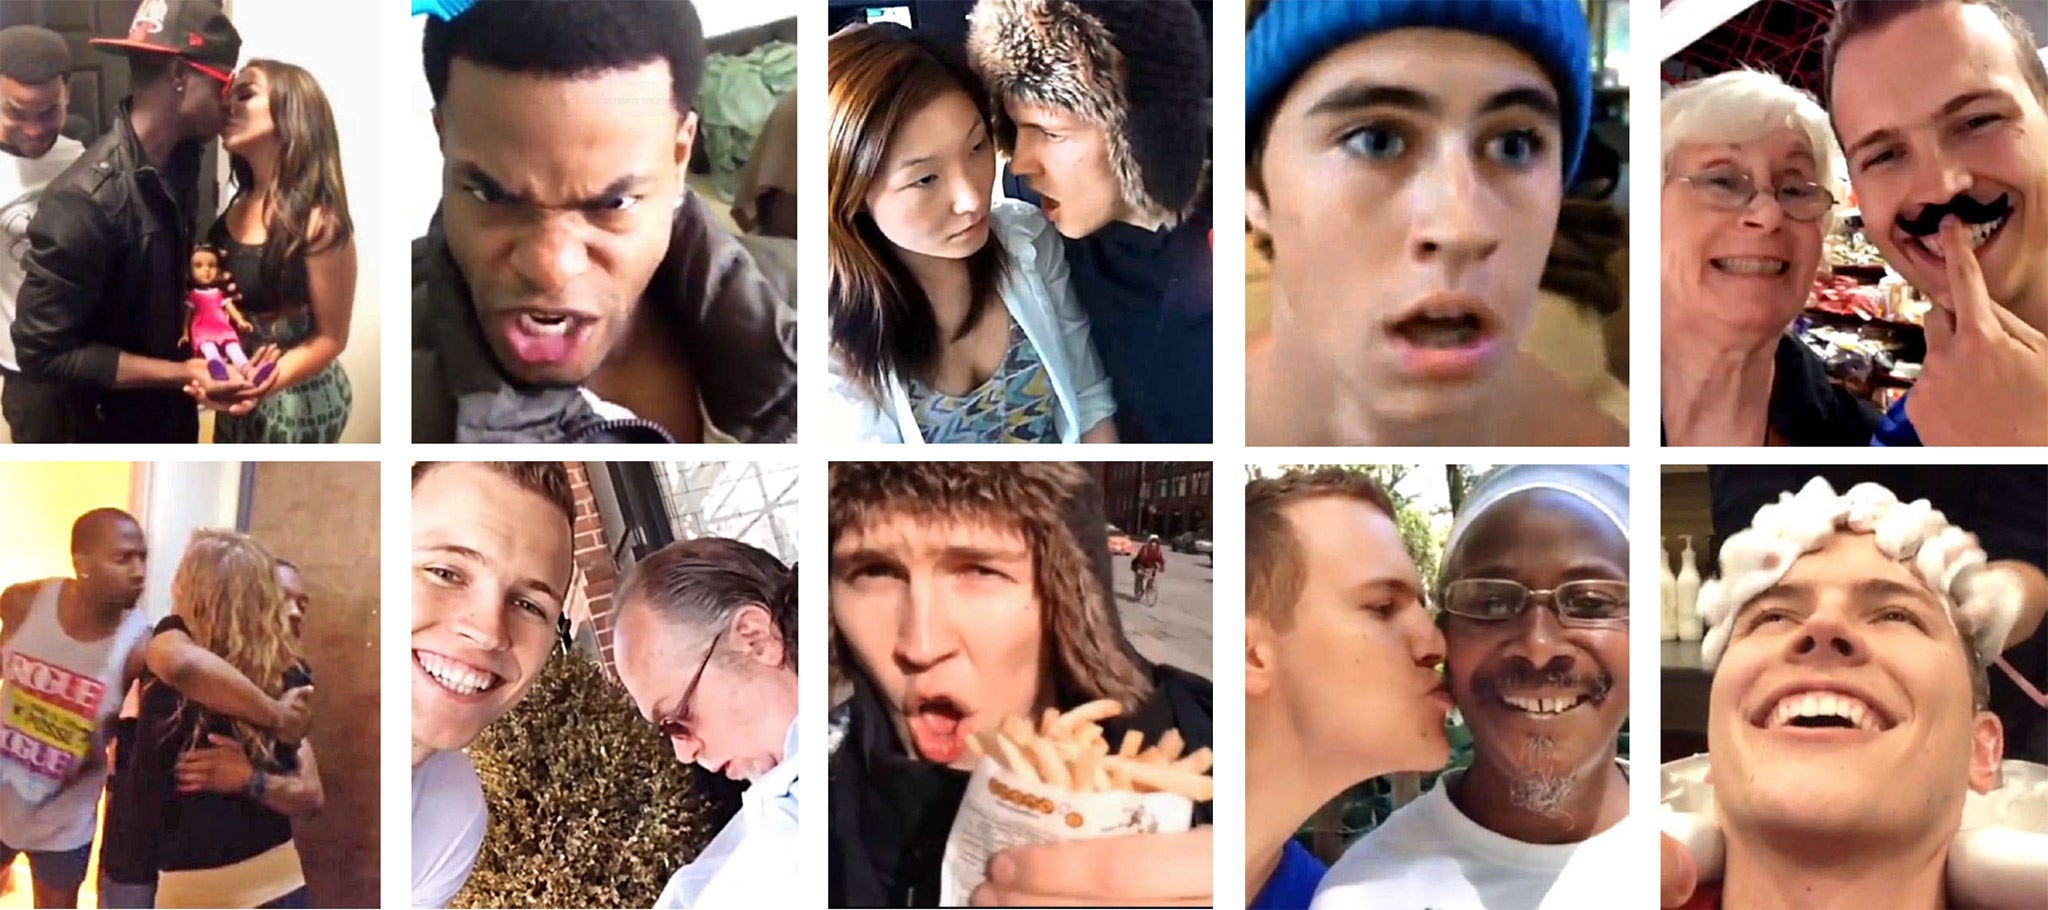 Video stars: top Viners King Bach, Jerome Jarre and Nash Grier in various online skits and pranks